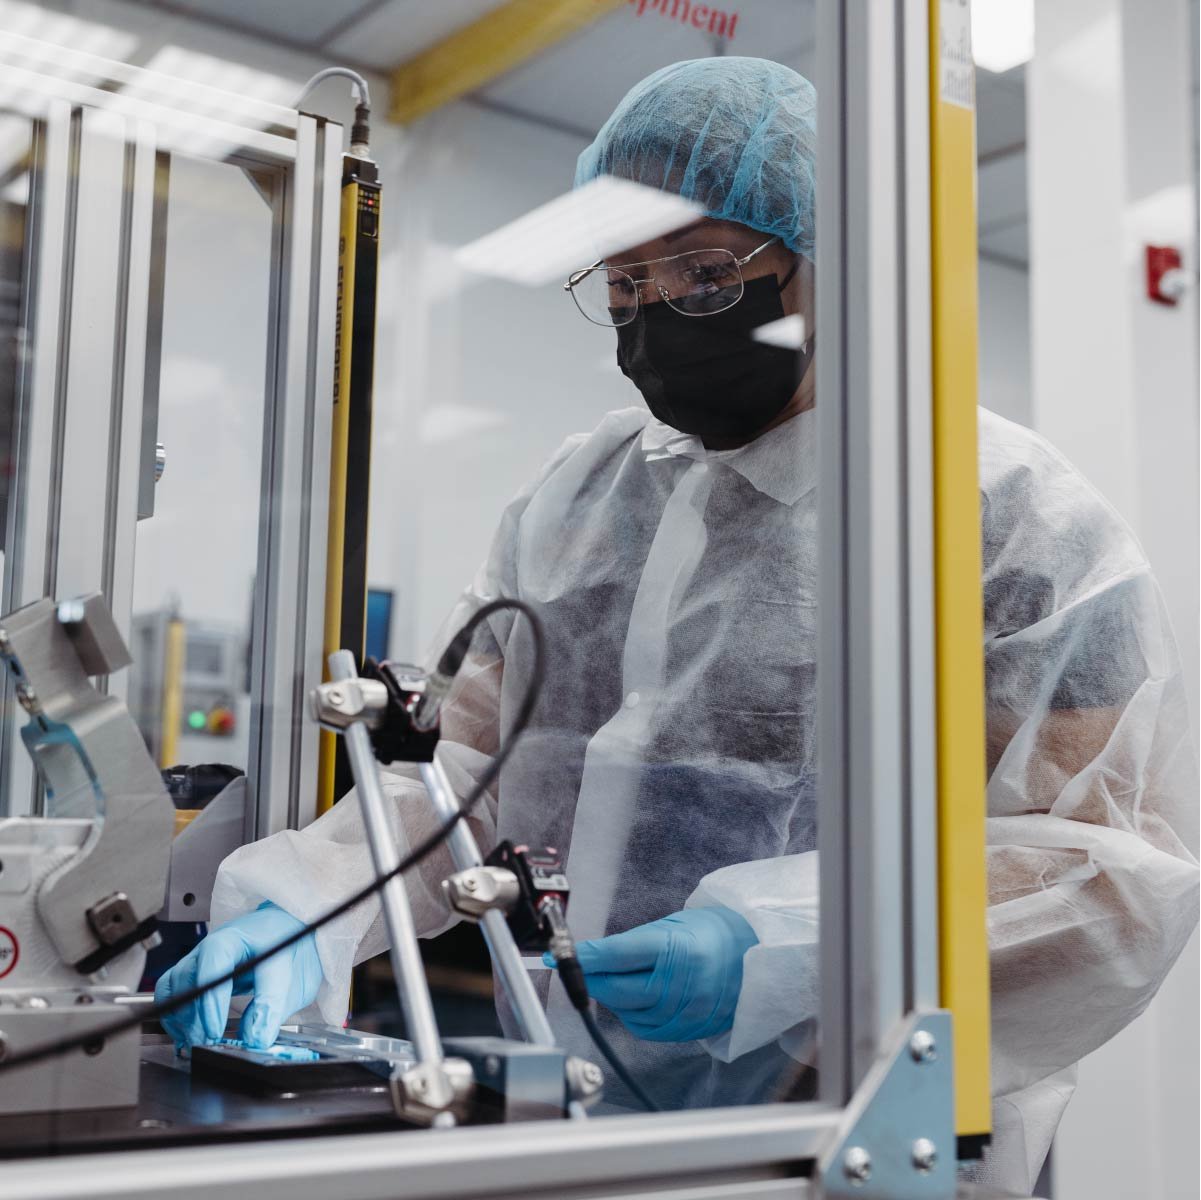 A Micron employee working in a cleanroom